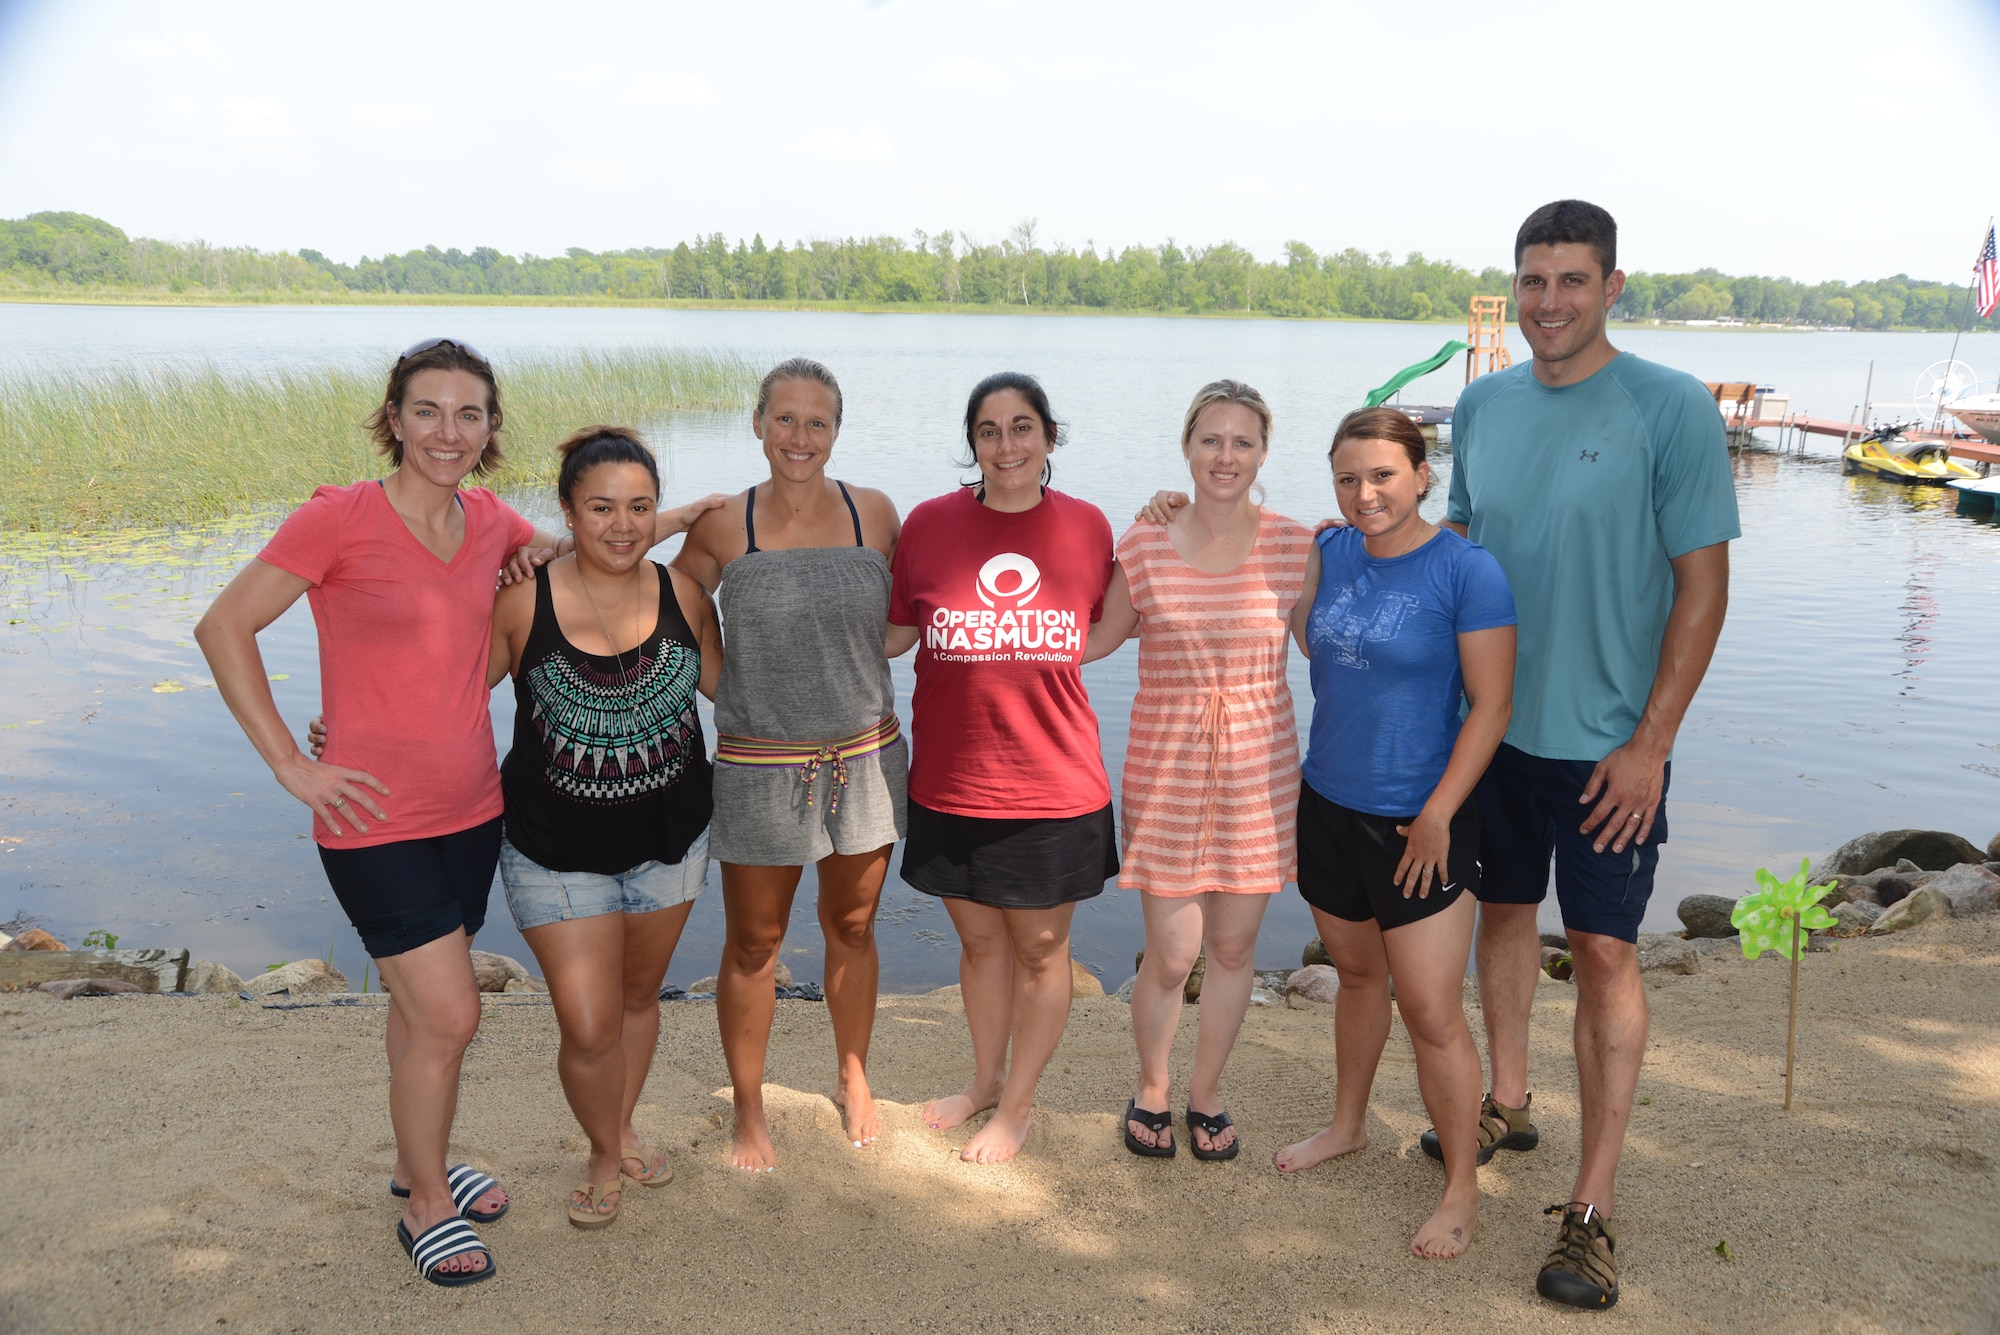 Husband and wife team Lt. Col. Micaela Brancato, left, and Lt. Col. Matthew Brancato, right, pose for a photo with their guests of Holbrook Farms Retreat from left to right Sonia Cazarez, Sarah Merwin, Leigh Giglio, Tami Imlay and Dana Lyon, as they relax at neighboring Maud Lake, Minn., Aug. 1, 2014. The guests of the Brancatos are widows of U.S. military members who lost their lives while serving their country. (U.S. Air Force photo/Senior Master Sgt. David H. Lipp)